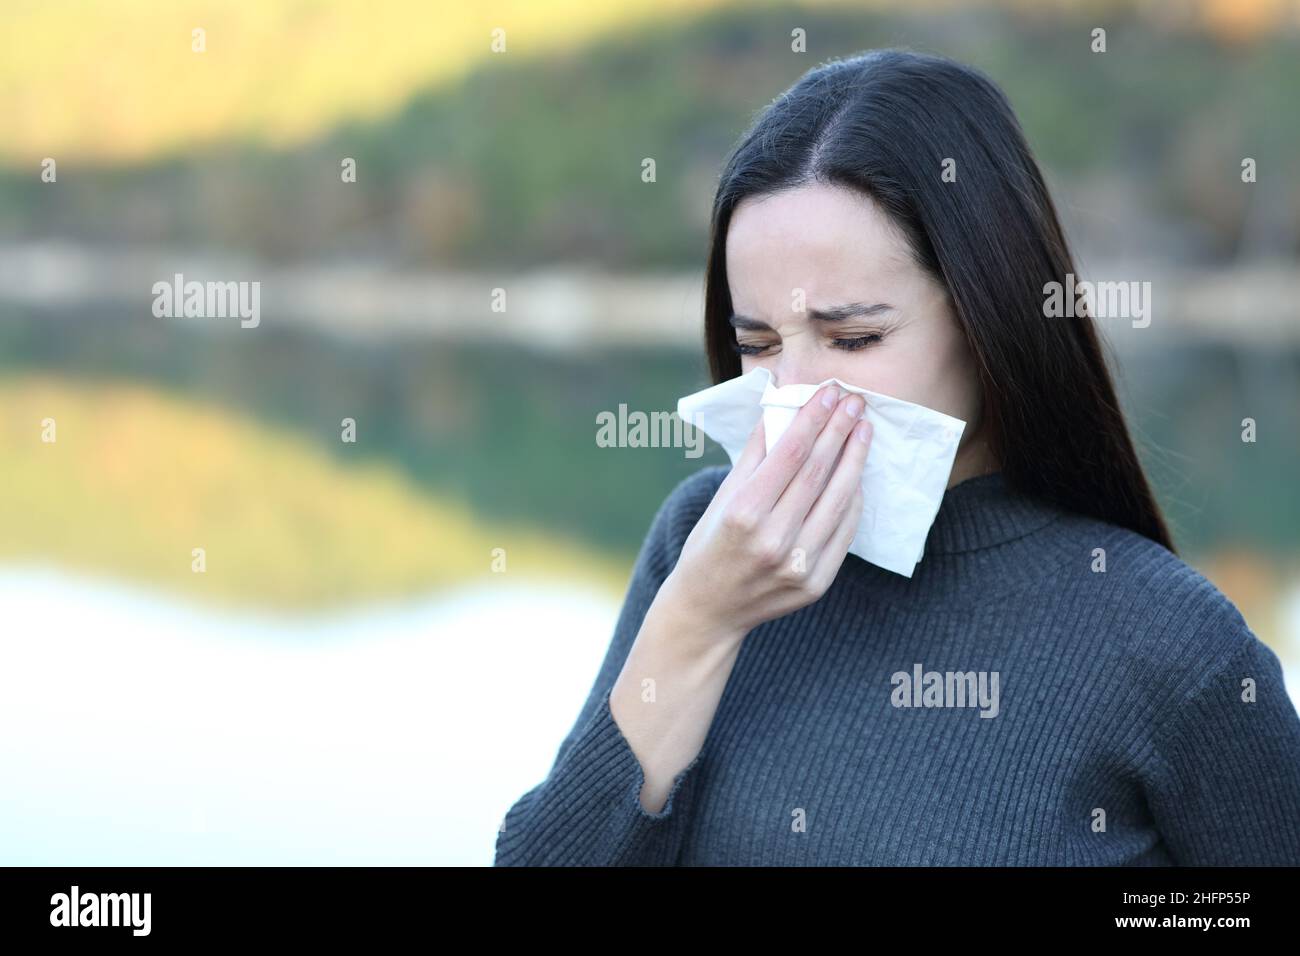 Ill woman blowing nose with a tissue outdoors in winter Stock Photo